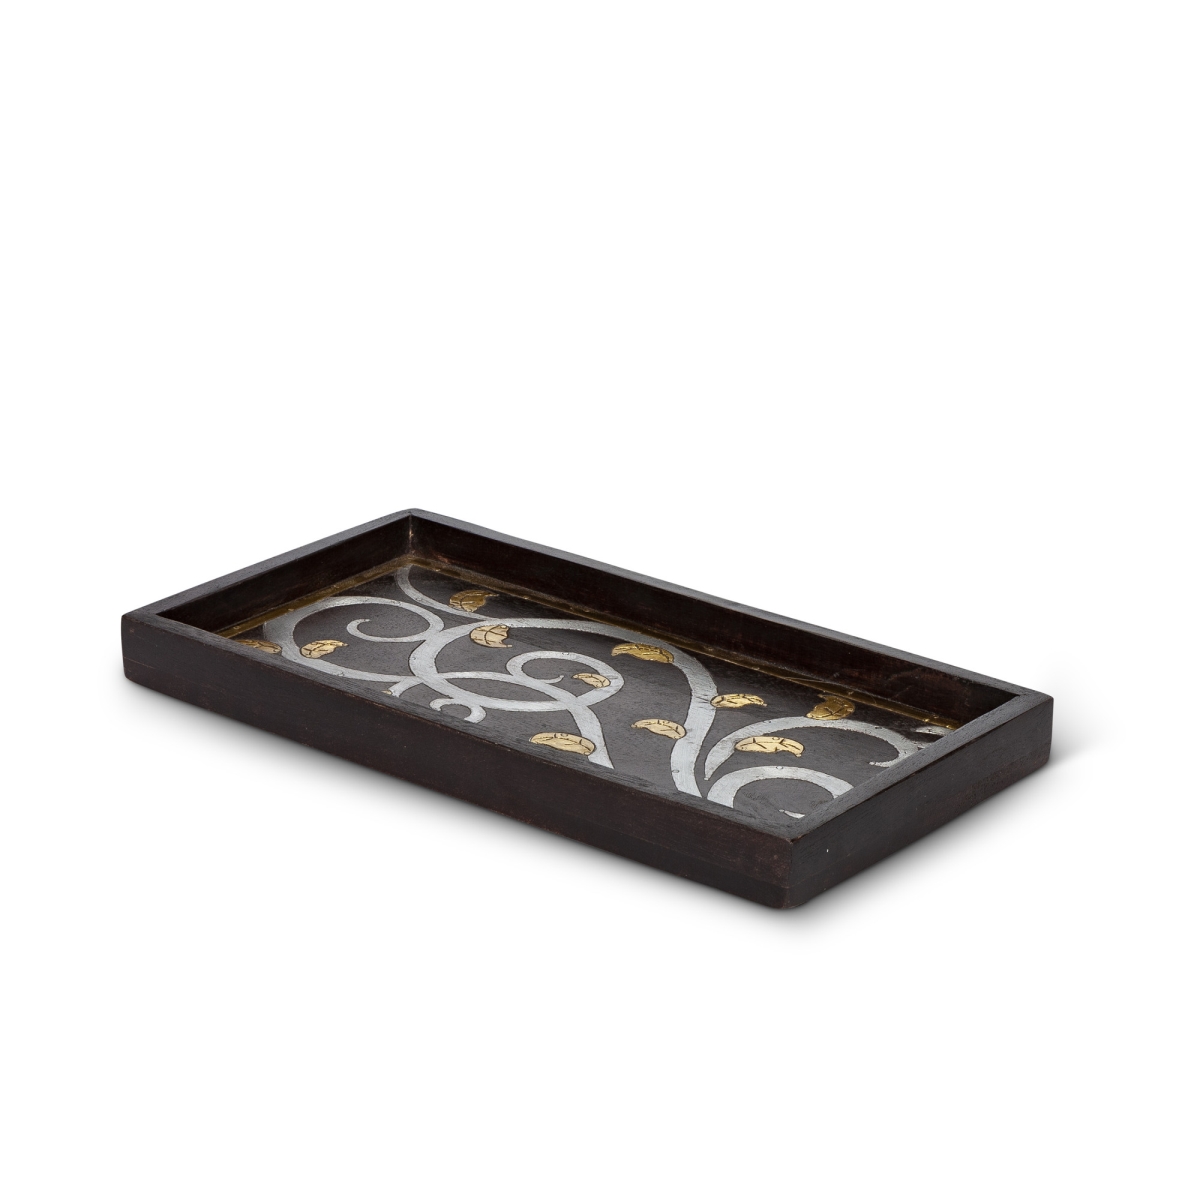 Gerson 94757 Unique Hand-crafted 14 In. Long Gold Leaf Mango Wood Tray With Gold-tone Handles - Black